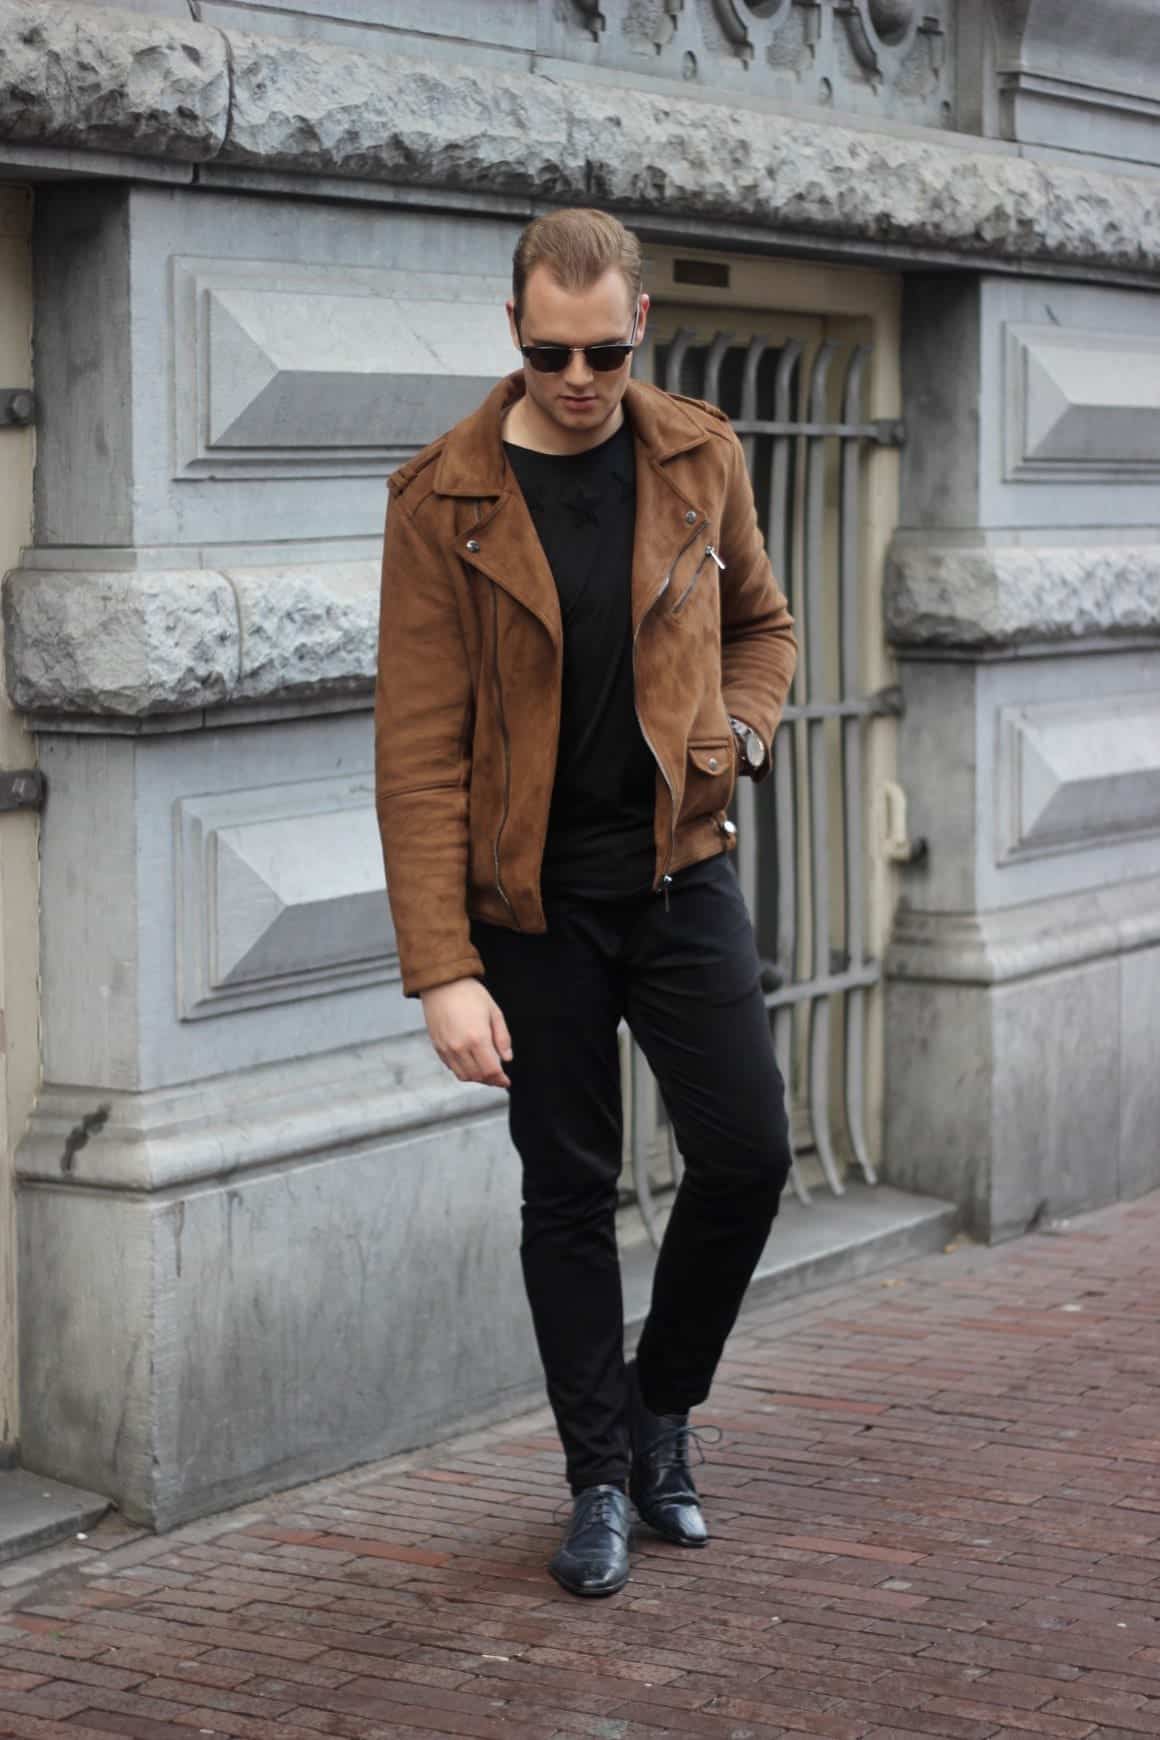 Suede Jacket Outfits for Men- 20 Ways to Wear a Suede Jacket